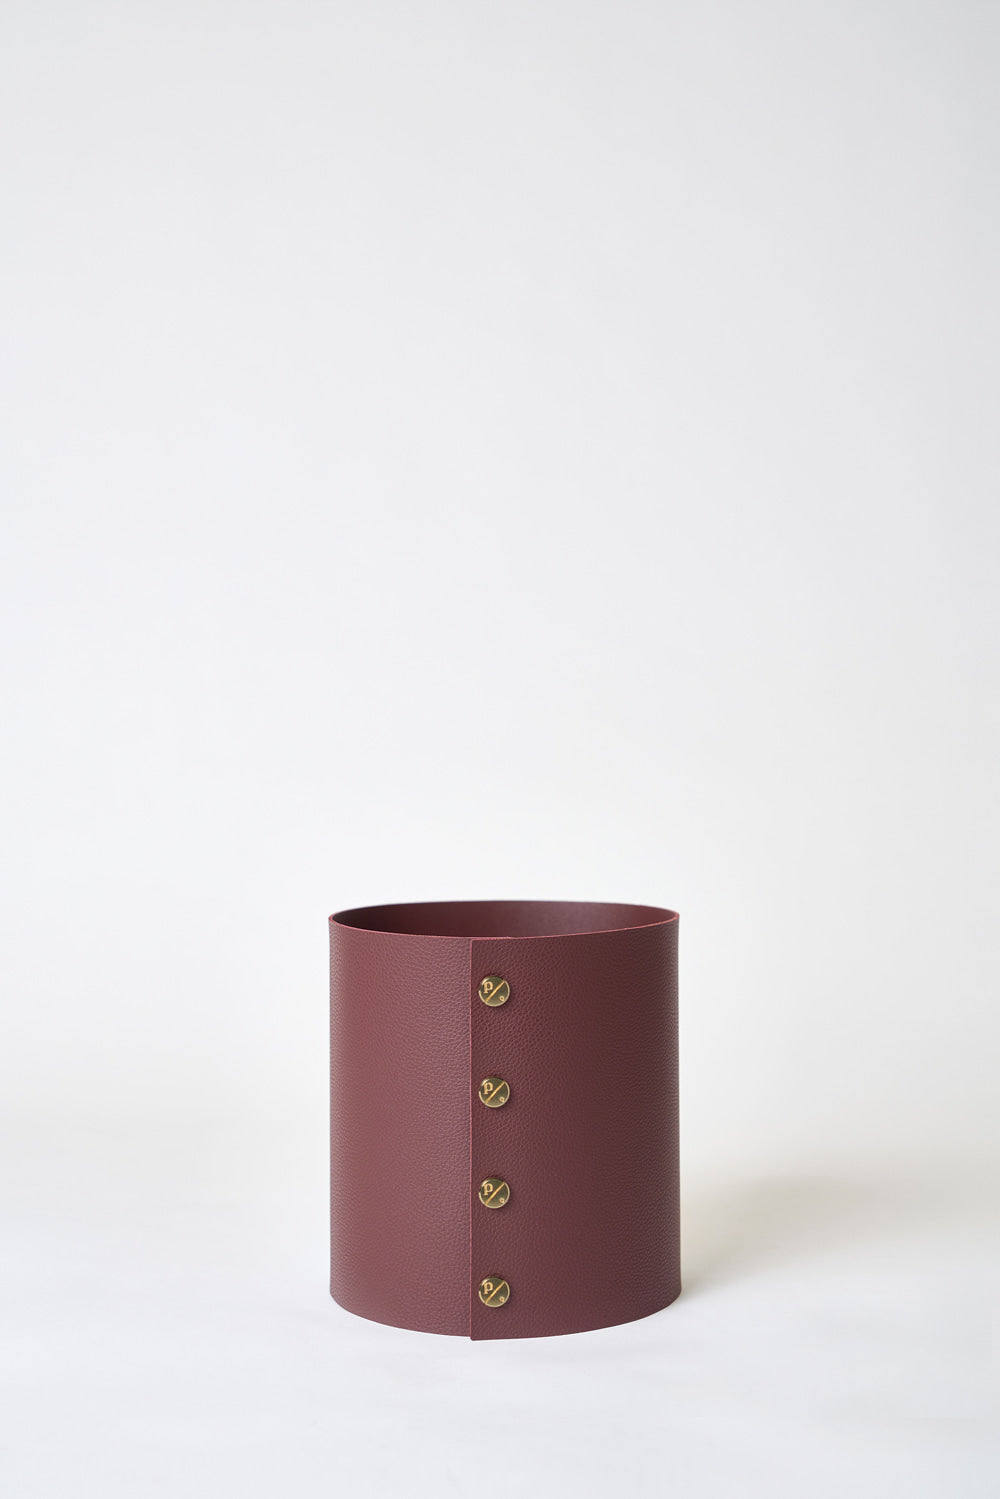 Pod Cover Leather Burgundy - S